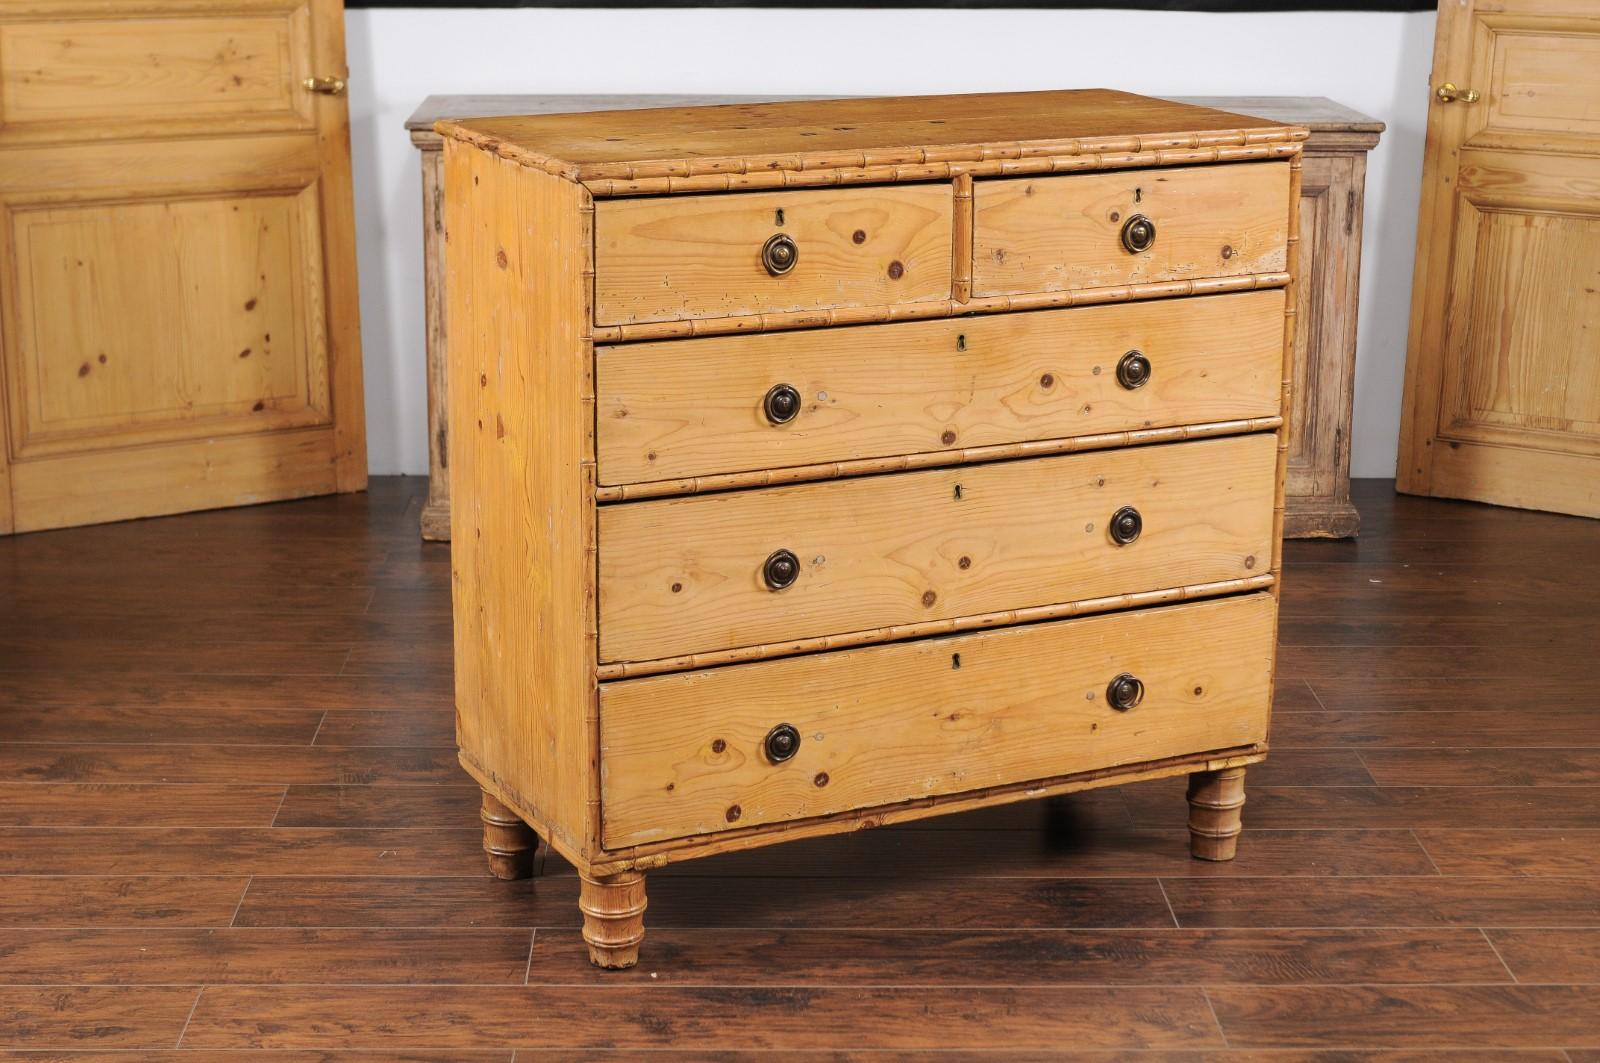 A French faux-bamboo pine chest-of-drawers from the late 19th century, with cylindrical feet. Born in France during the last quarter of the 19th century, this rustic chest features a rectangular top accented with a faux-bamboo trim, sitting above